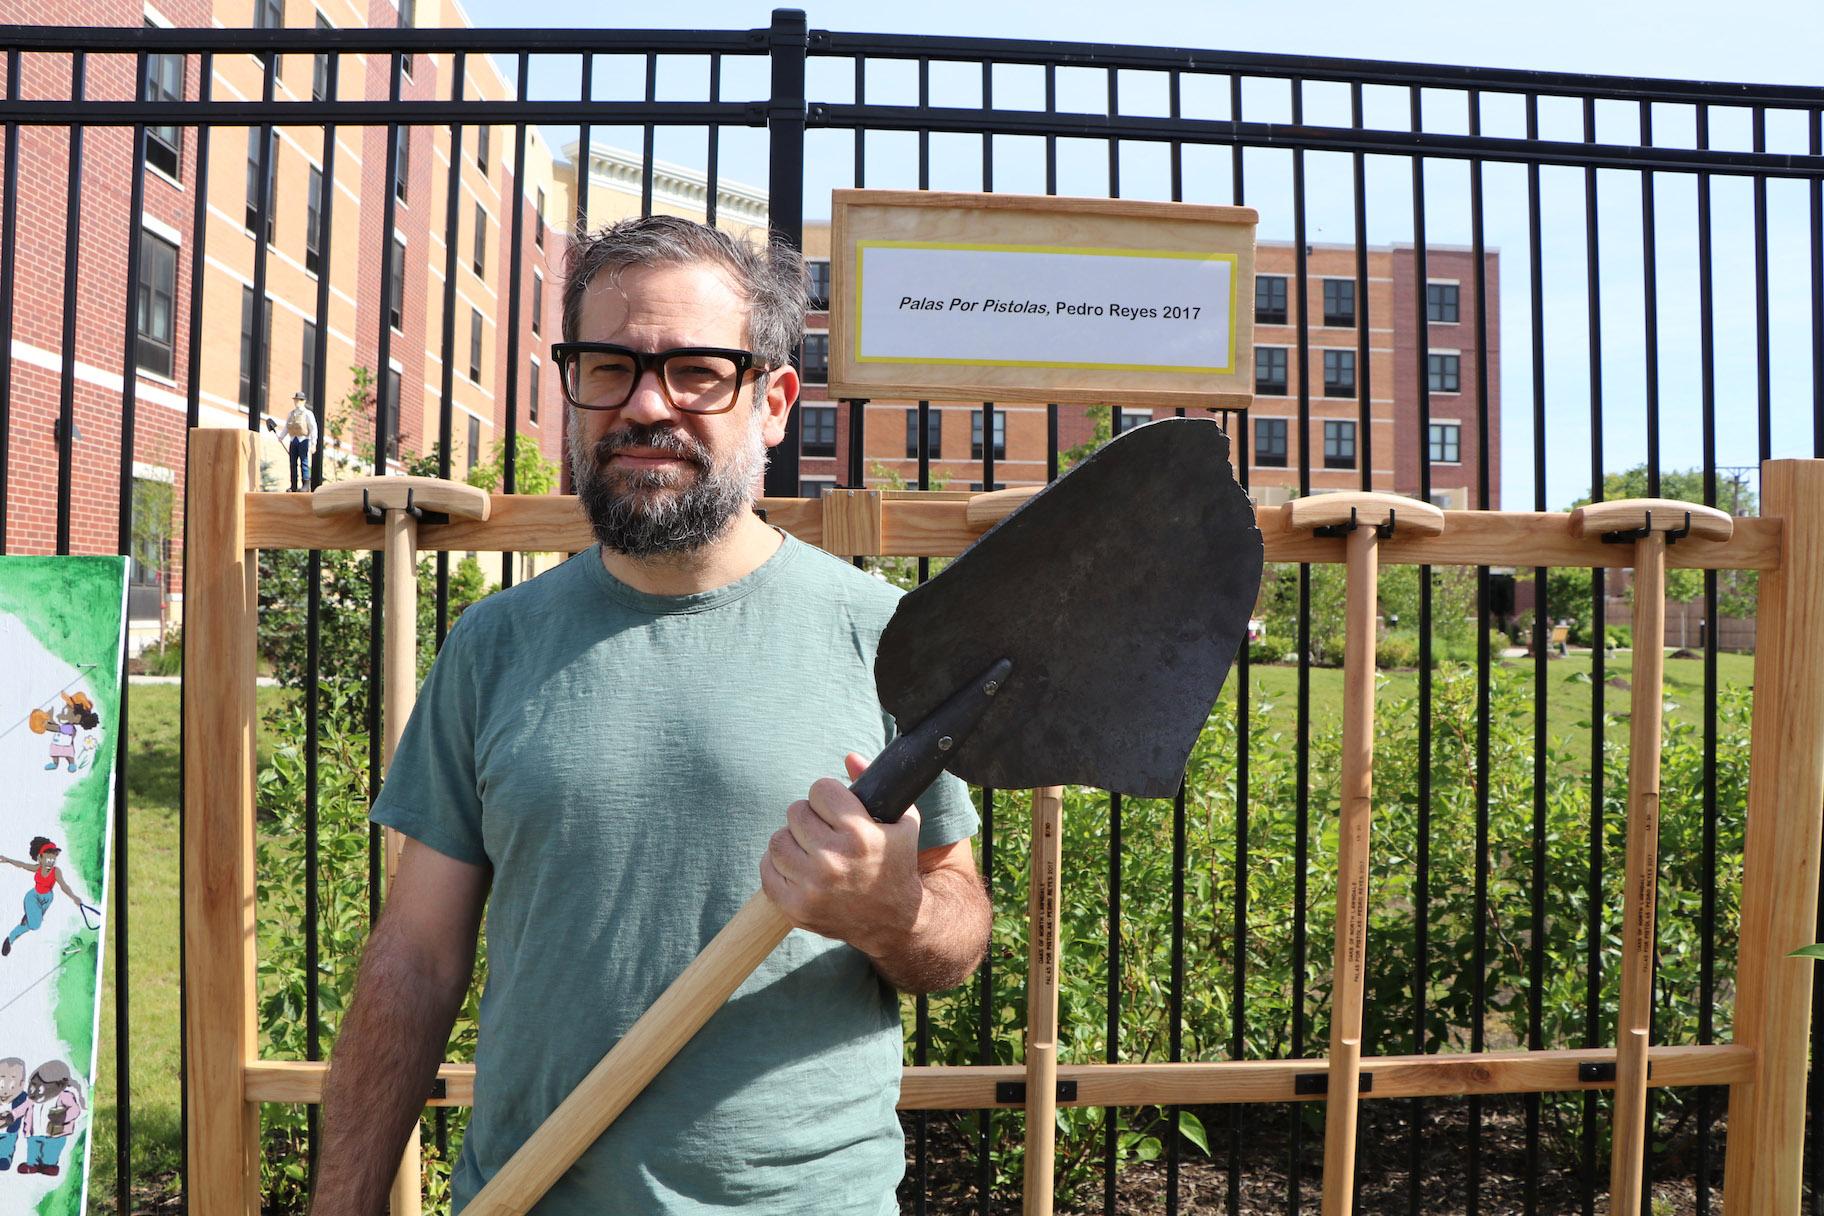 Mexican artist Pedro Reyes holds a shovel that’s part of his “Palas por Pistolas” collection. The shovel’s head is made from melted guns. (Evan Garcia / WTTW)